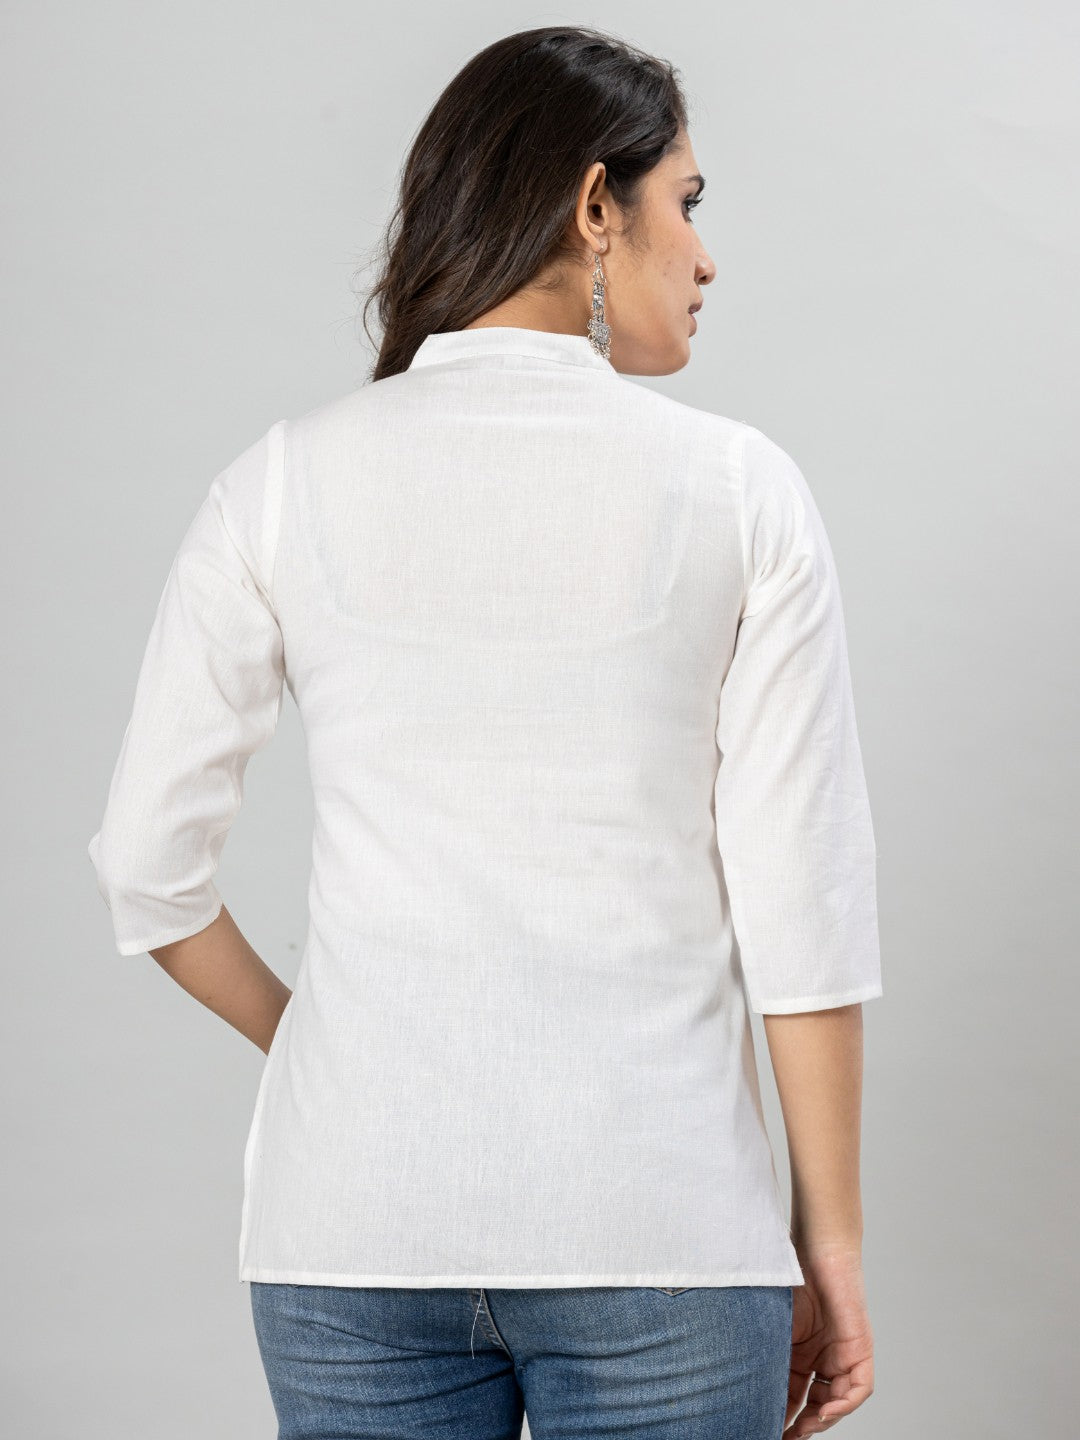 Solid Cotton Flax Women Top - White